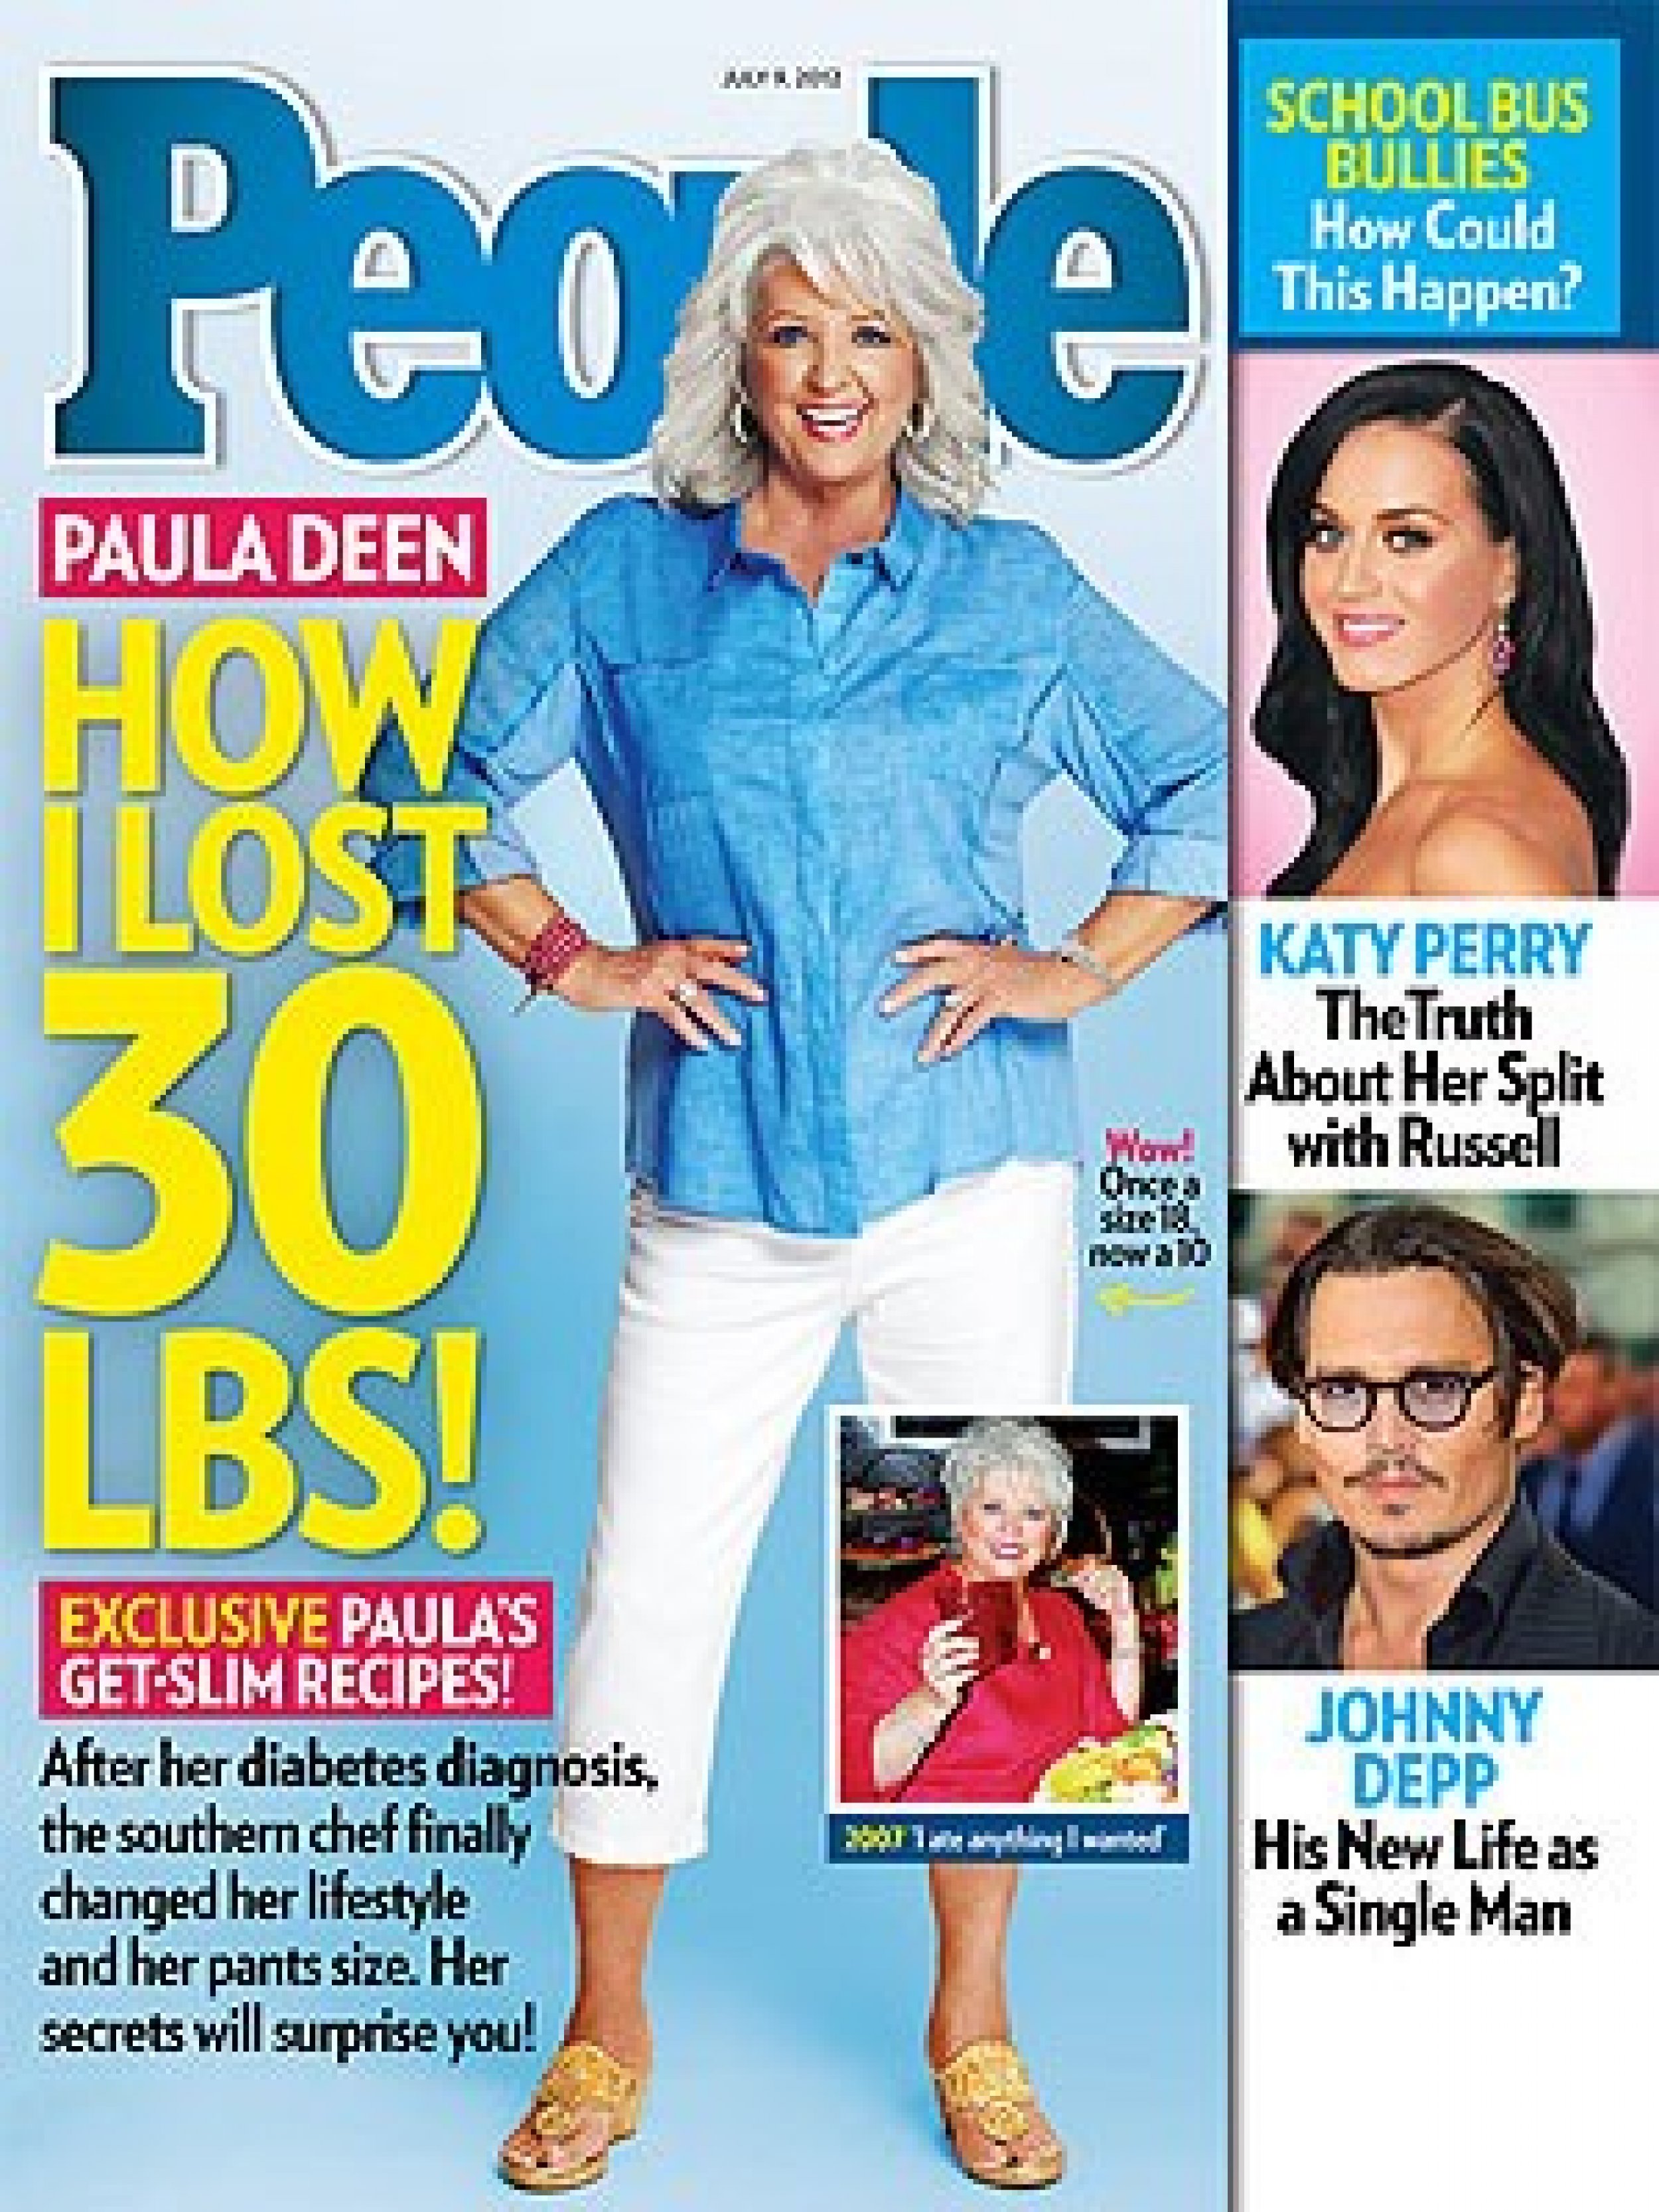 Just six months after announcing that she was diagnosed with Type 2 diabetes, Southern cuisine chef Paula Deen sported massive weight loss on the cover of People magazine, admitting that she shed 30 pounds and dropped from a womens size 18 to a 10 with a